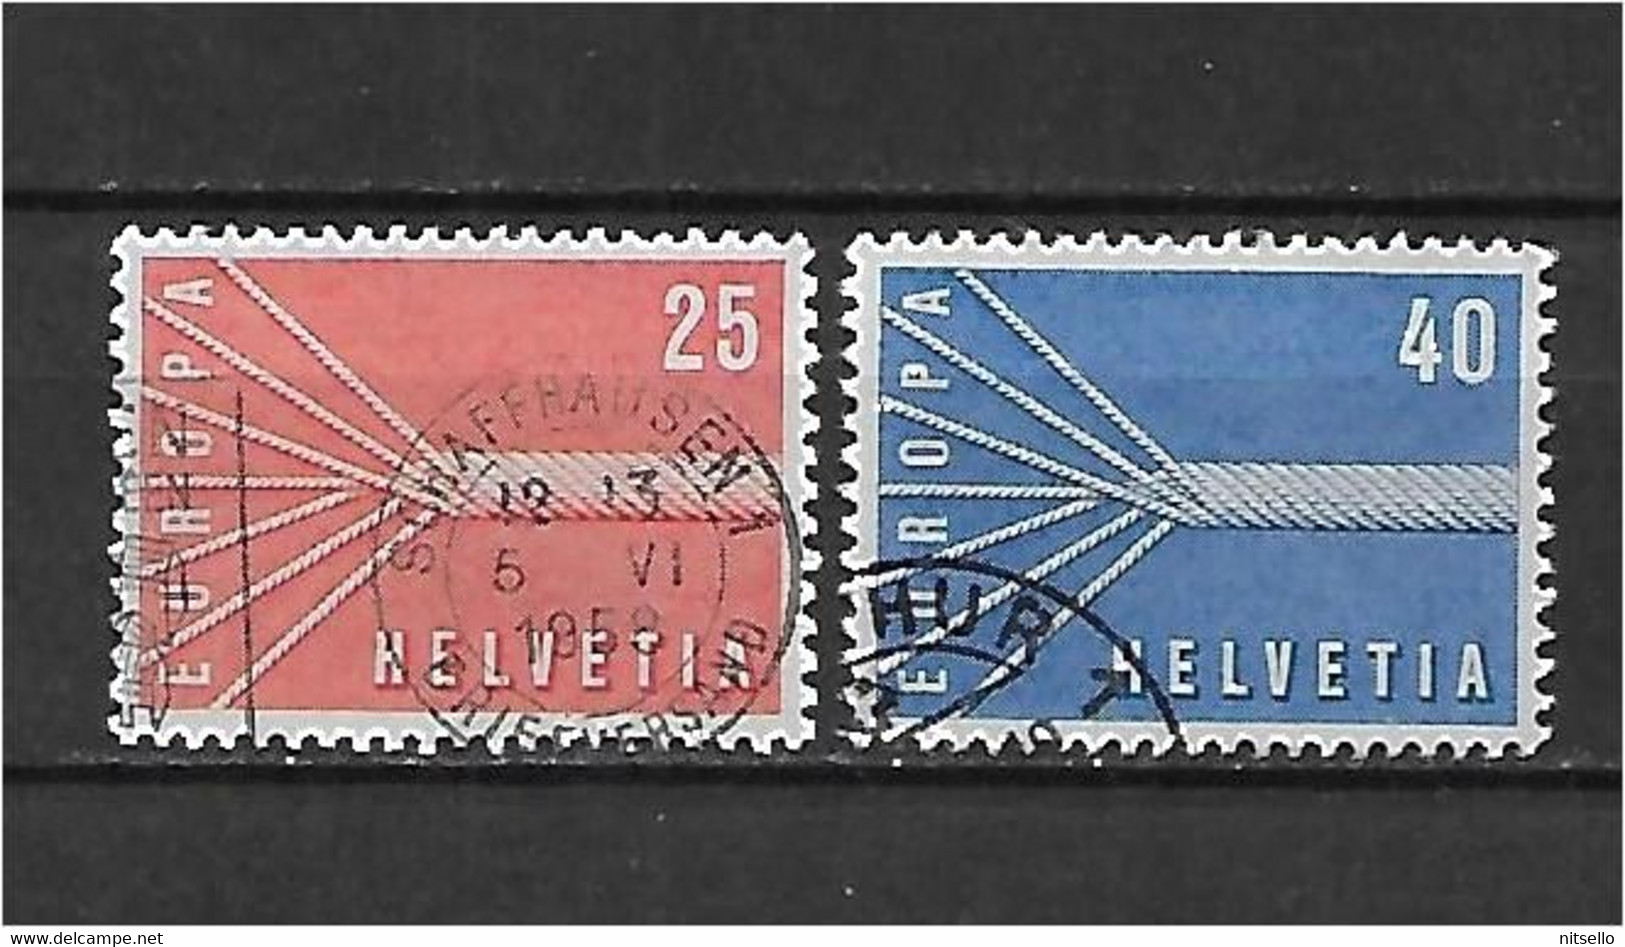 LOTE 1583  ///  SUIZA   YVERT Nº: 595/596     ¡¡¡ OFERTA - LIQUIDATION - JE LIQUIDE !!! - Used Stamps